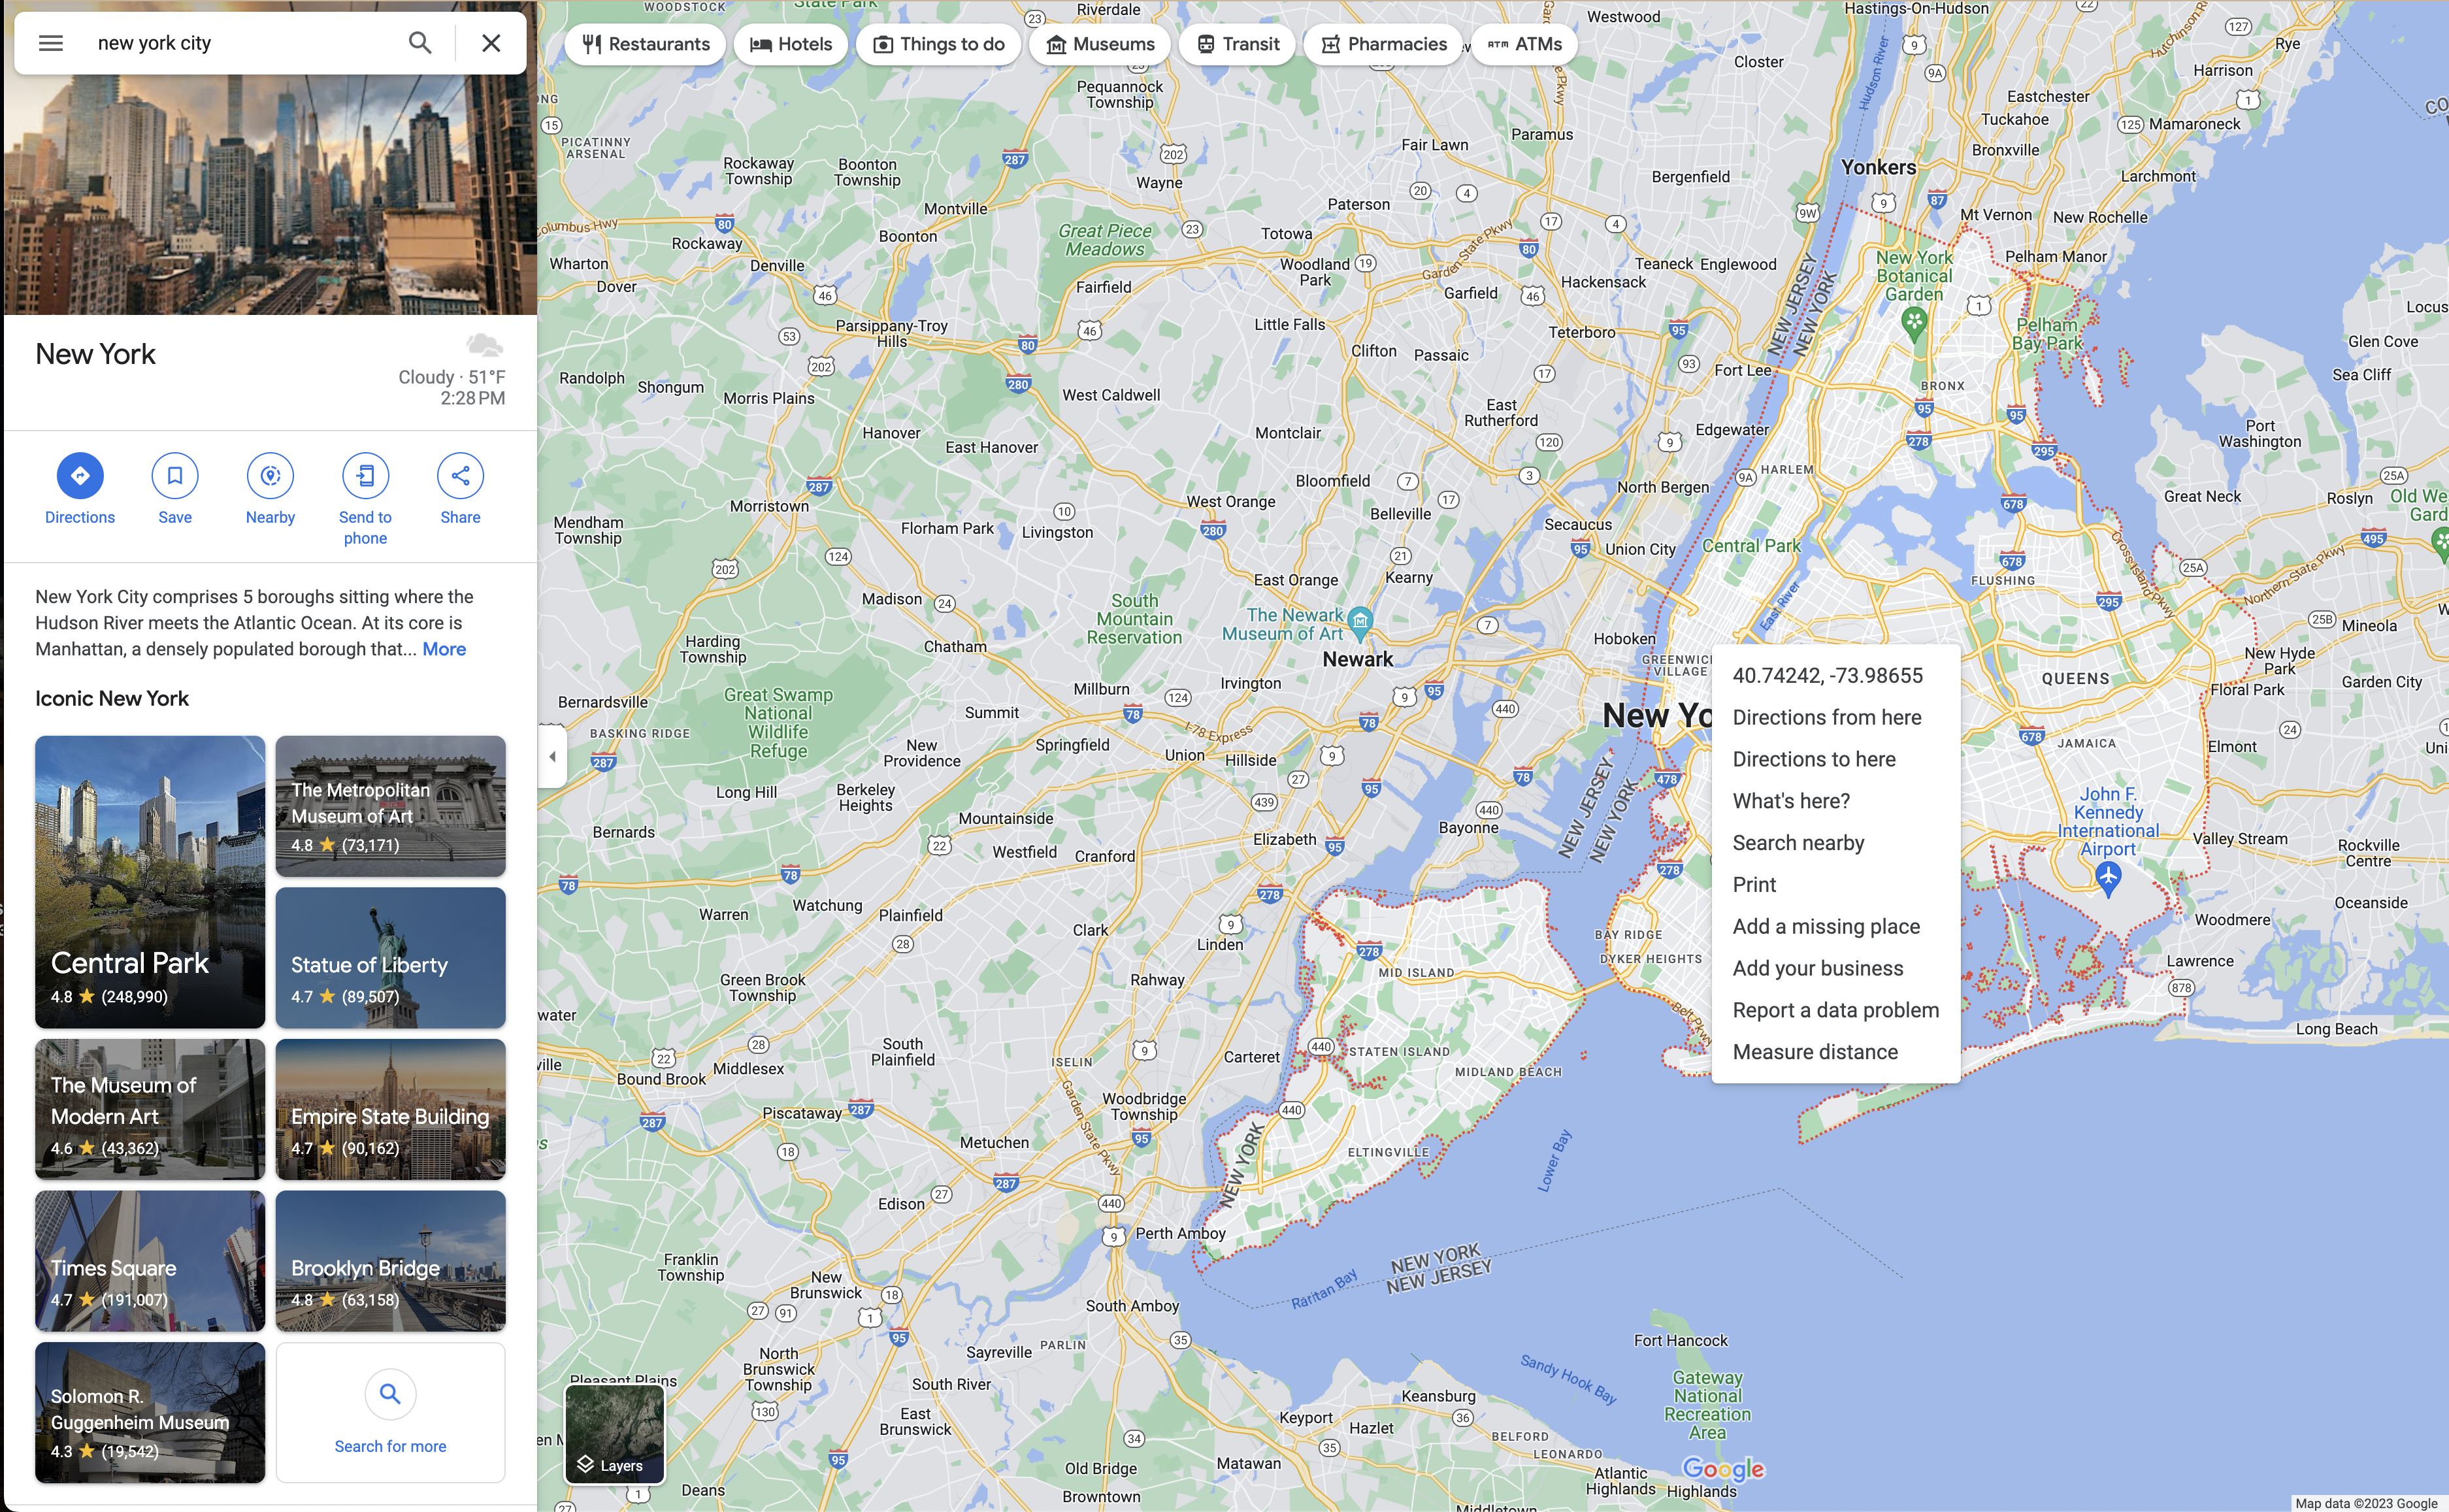 Screenshot of Google Maps after right-clicking to obtain coordinate data.